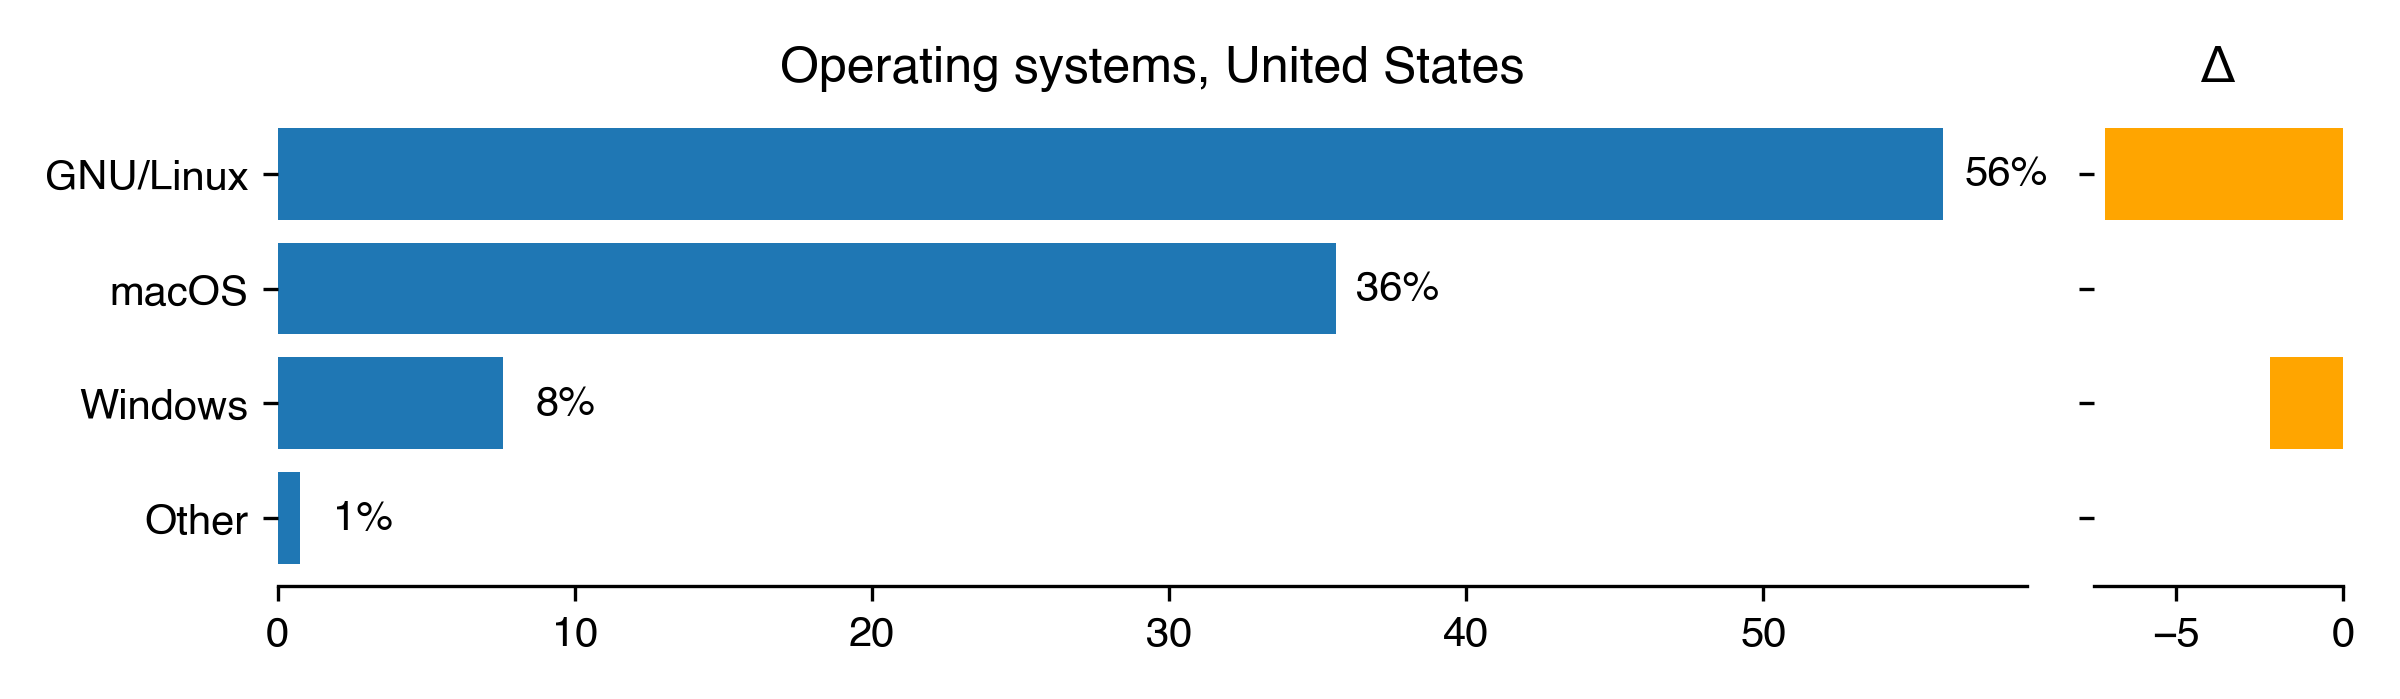 operating-systems